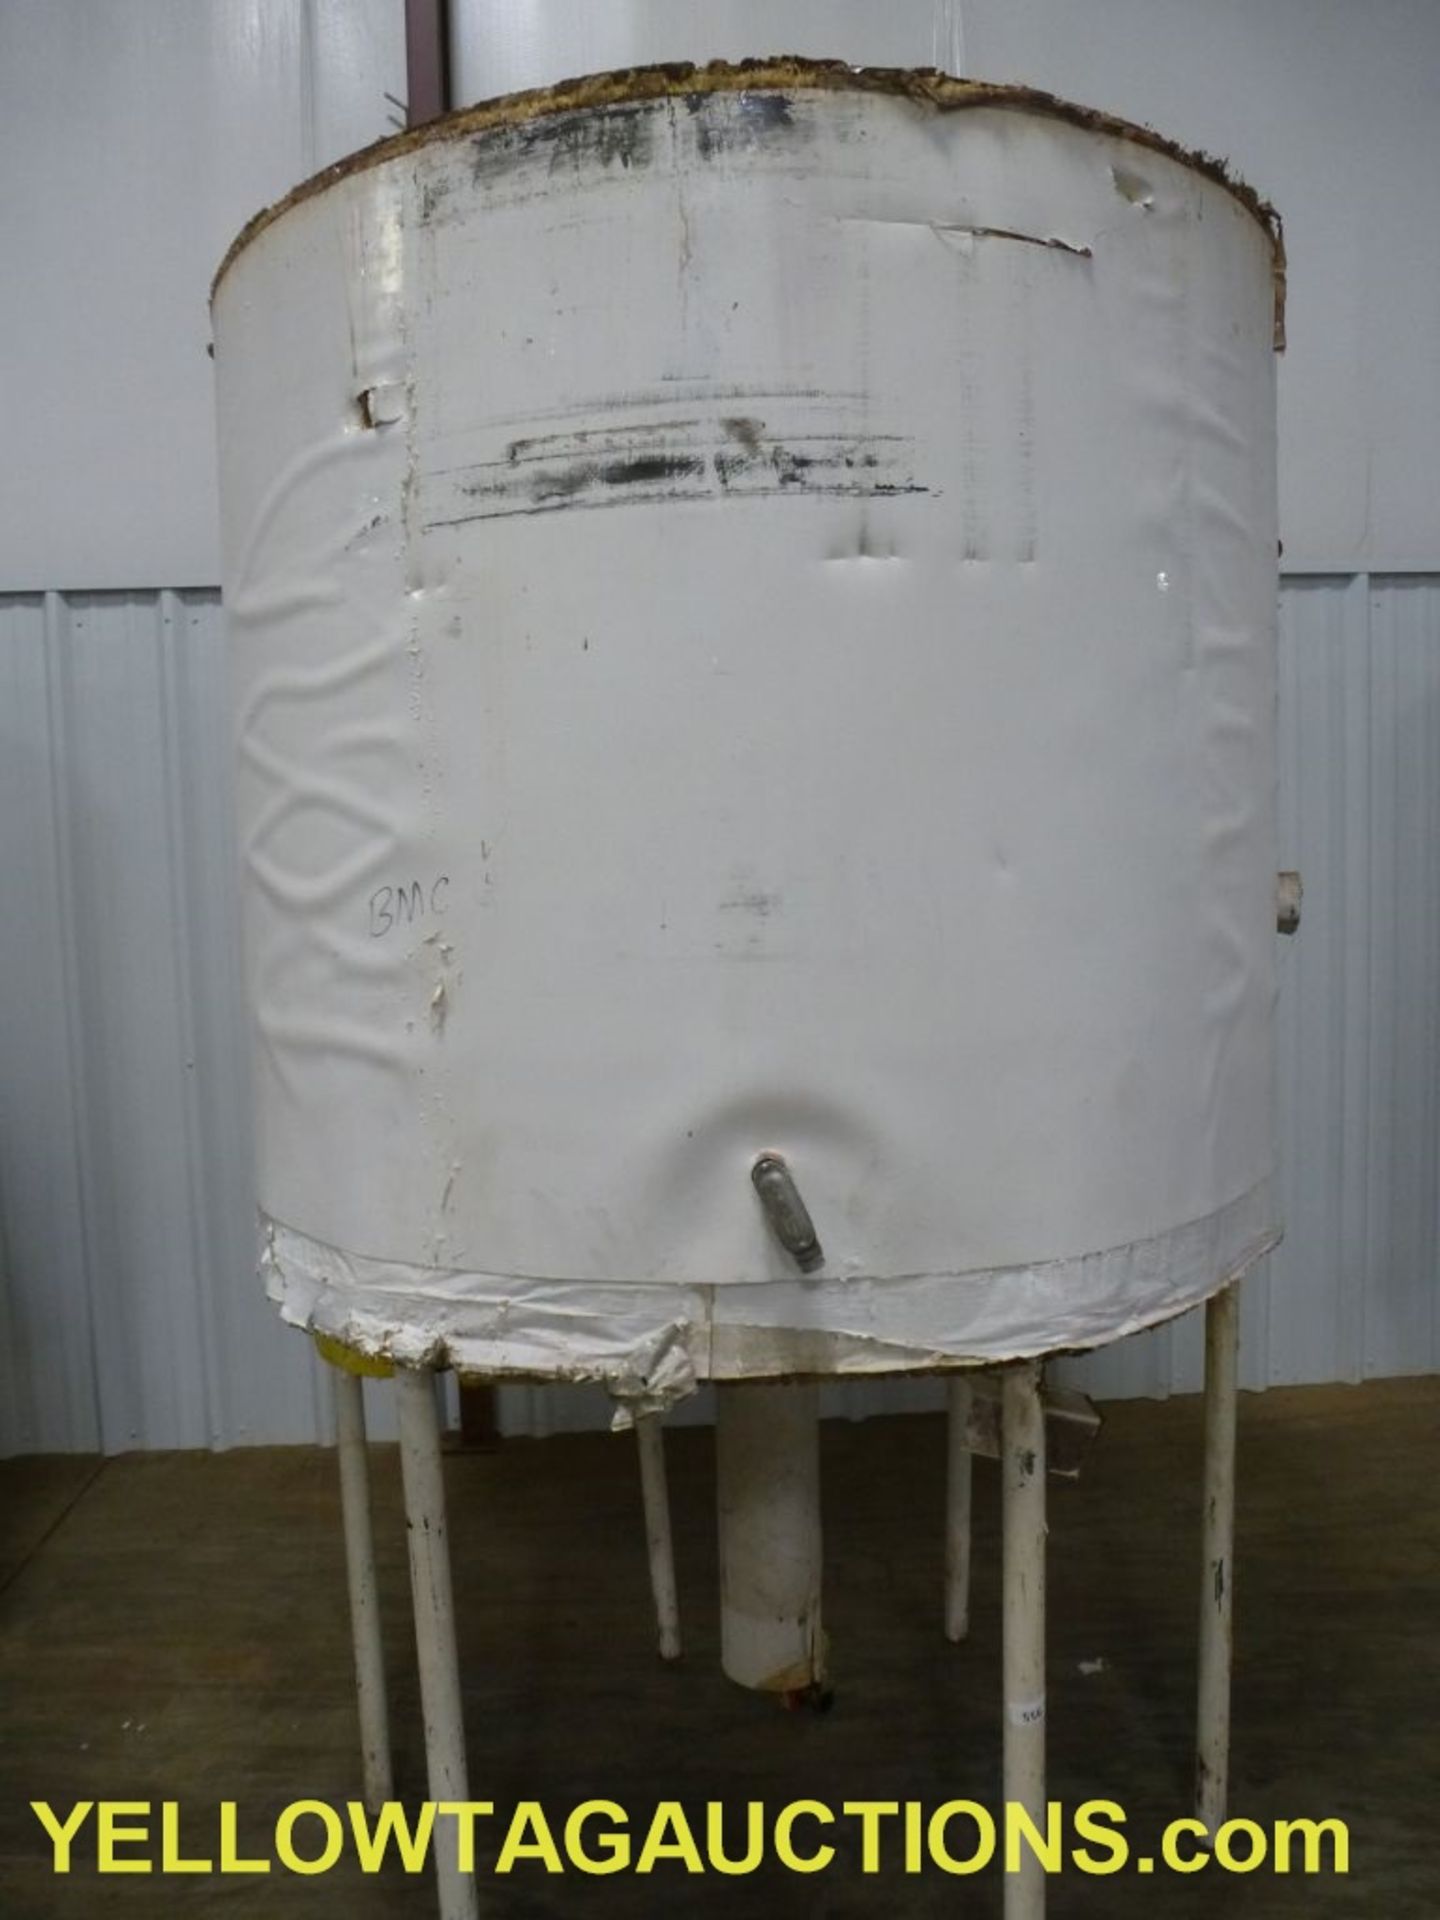 Stainless Steel Insulated Mixing Pot|52.5" D x 60" W|Lot Loading Fee: $5.00 - Image 2 of 9